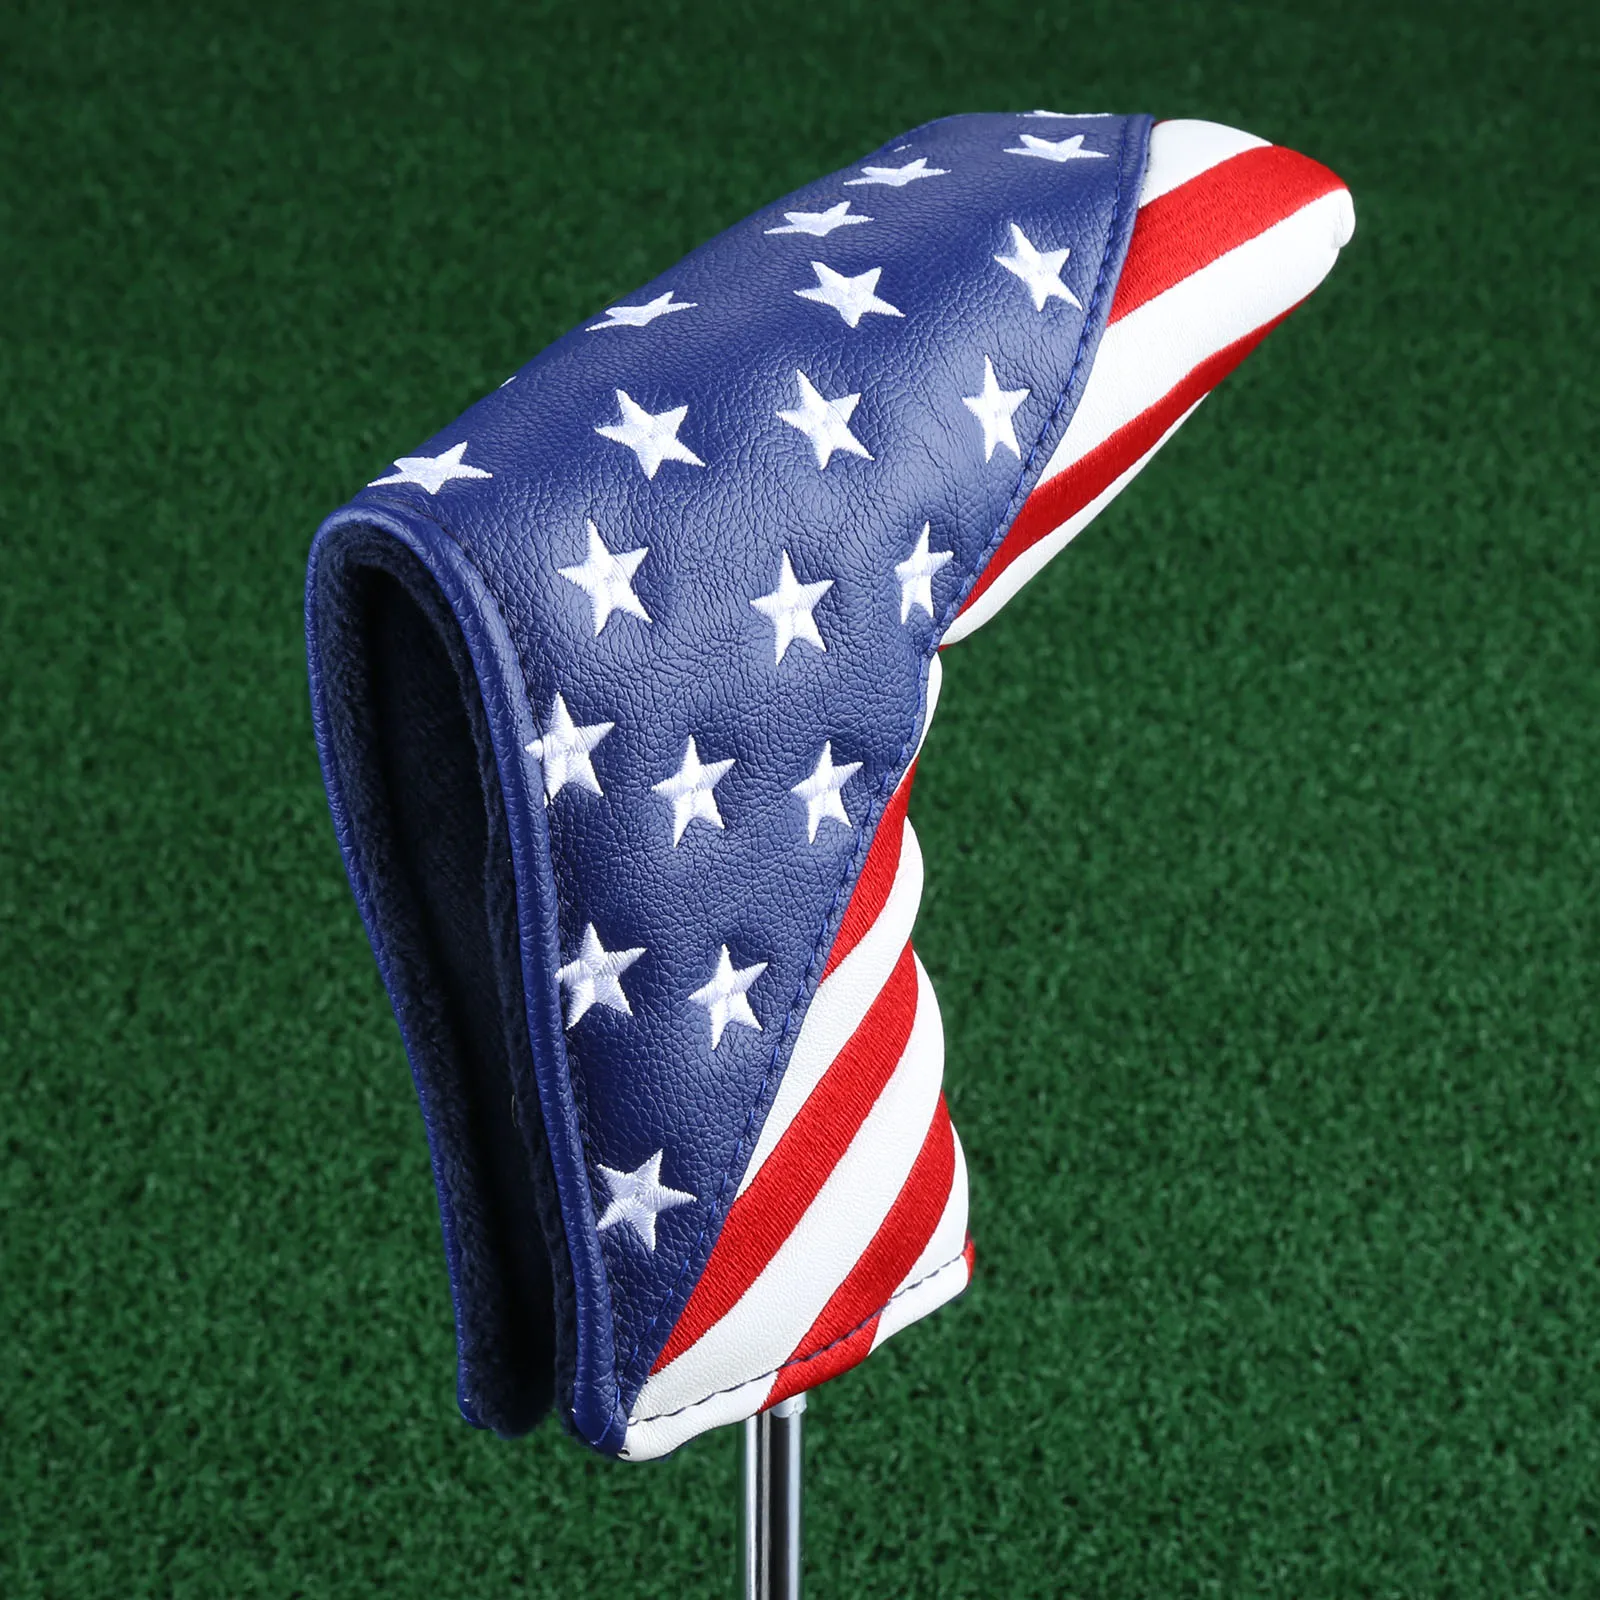 

Waterproof PU Leather Golf Blade Putter Headcover USA Stars & Stripes Flag Design Golf Head Cover Protect Set Golf Accessories